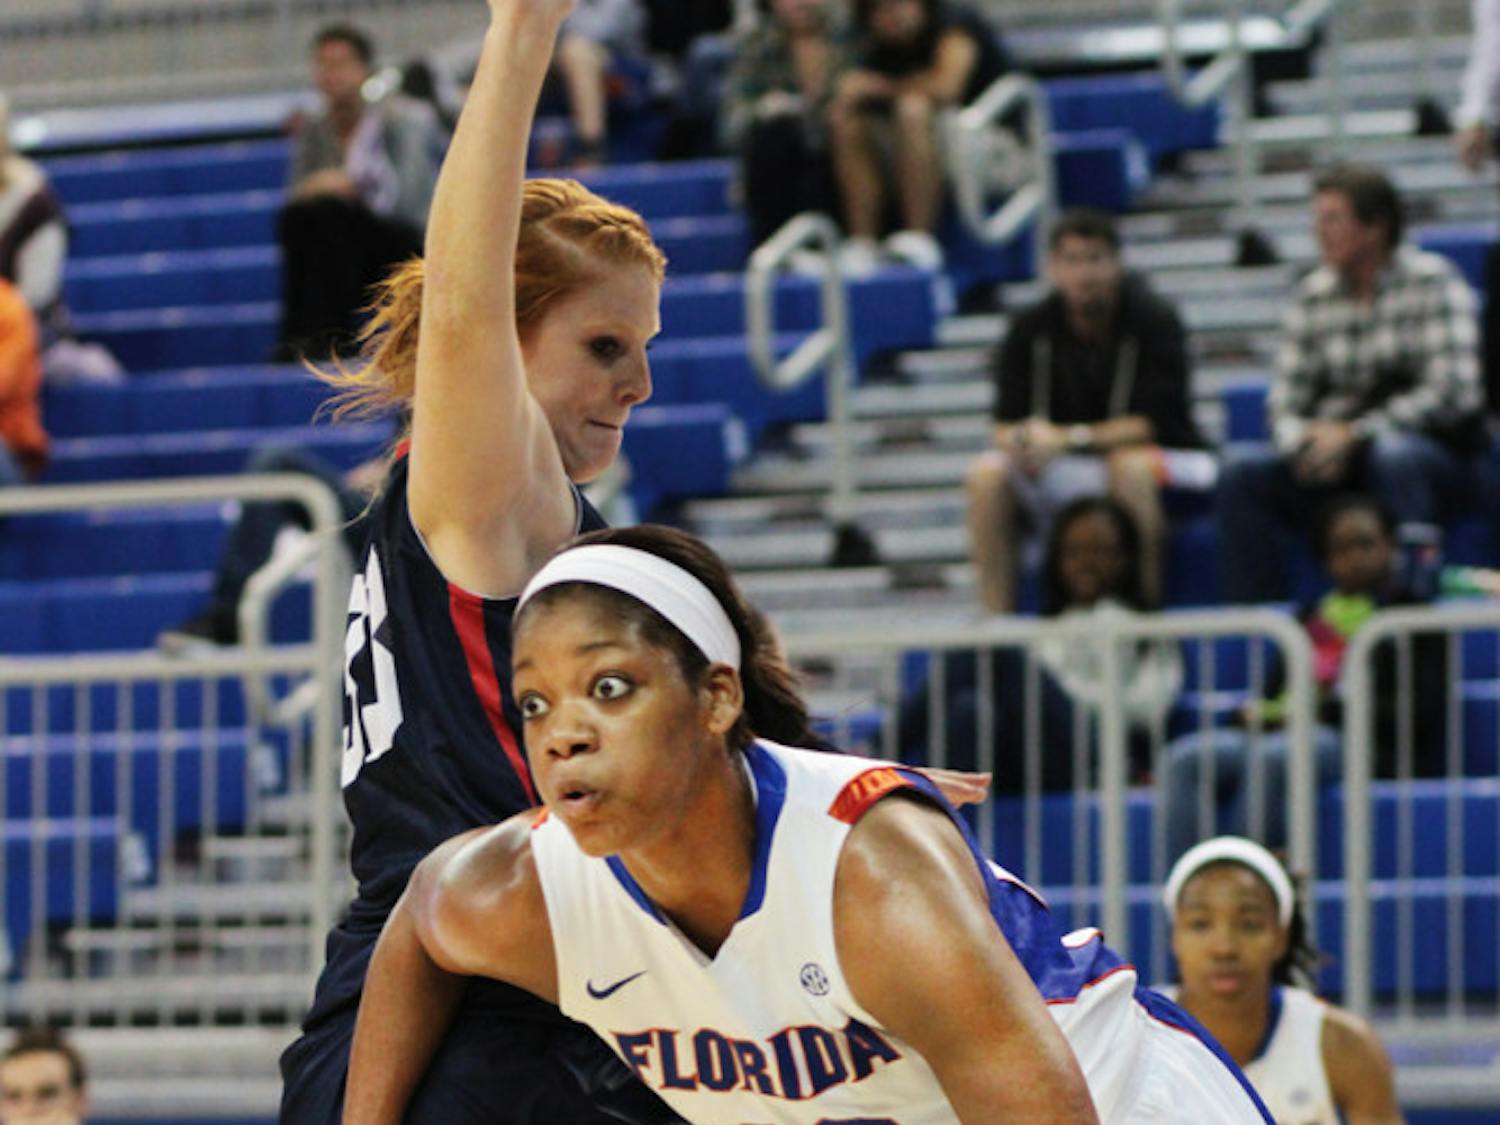 Forward Jennifer George (right) led the Gators with 15 points in
Tuesday’s win.